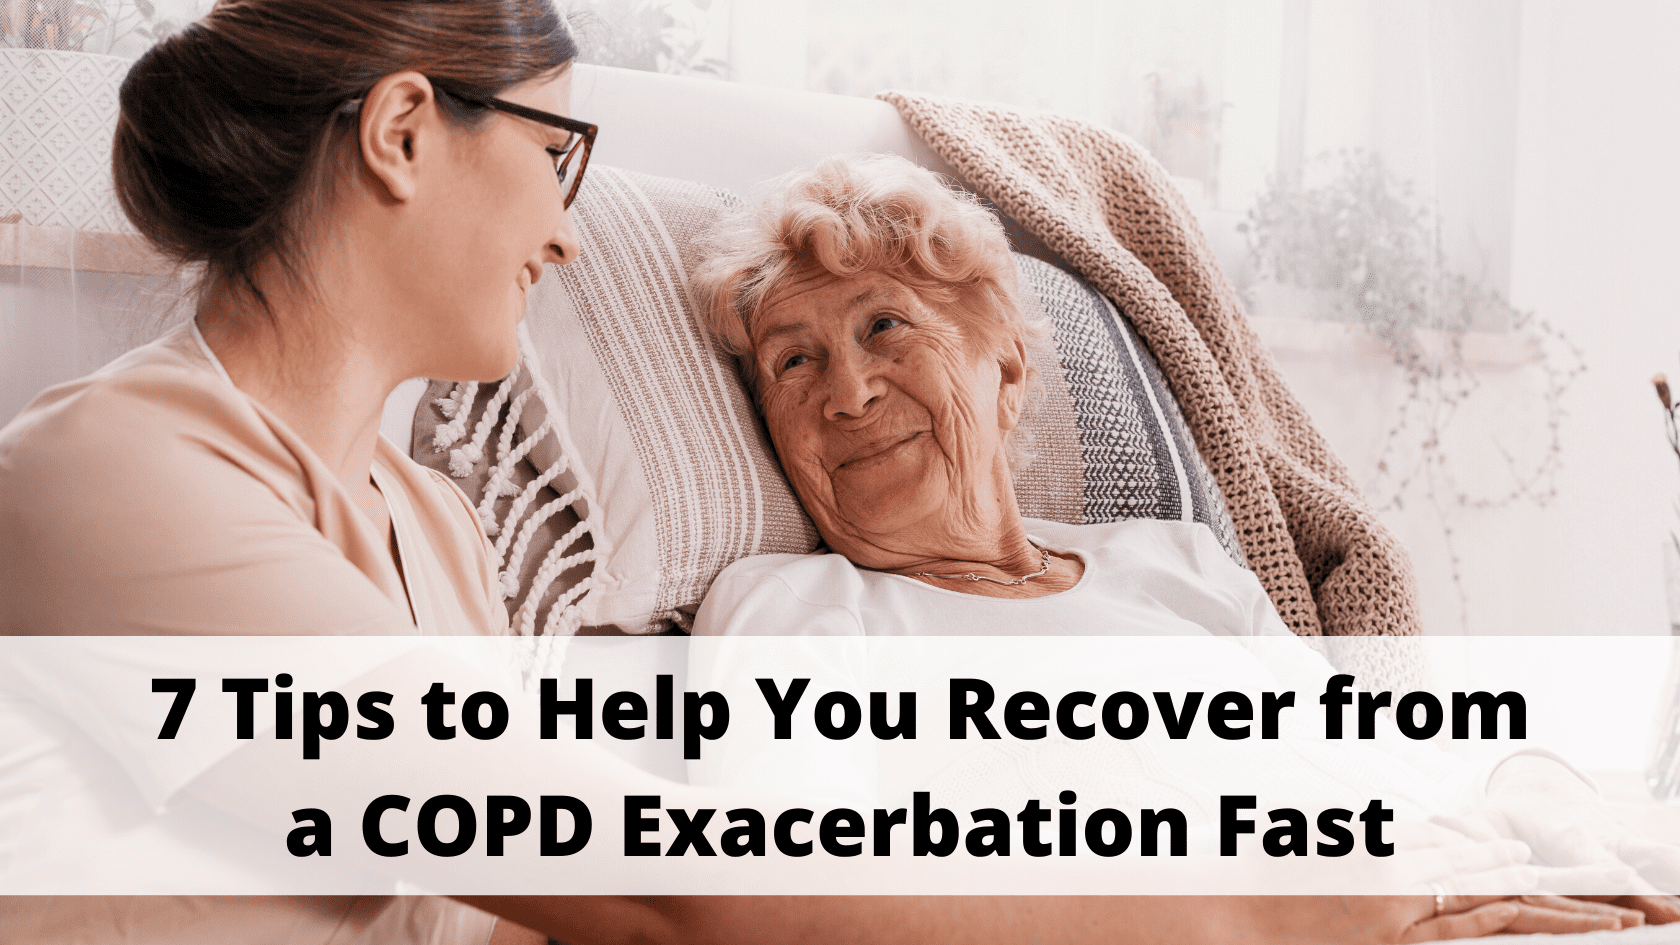 7 Tips to Help You Recover from a COPD Exacerbation Fast